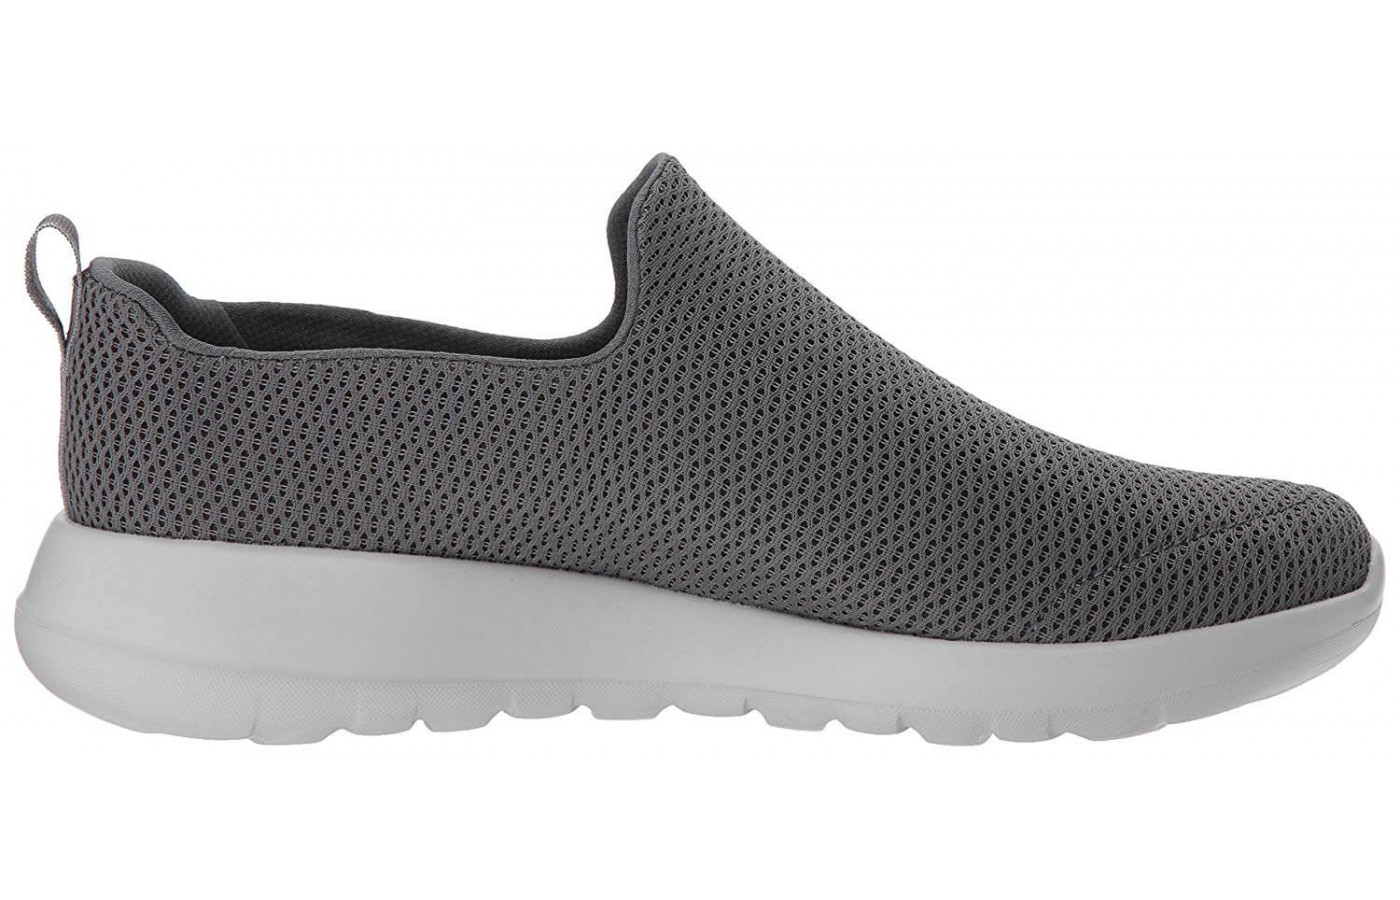 Skecher's 5GEN technology makes up the GoWalk Max's midsole and outsole